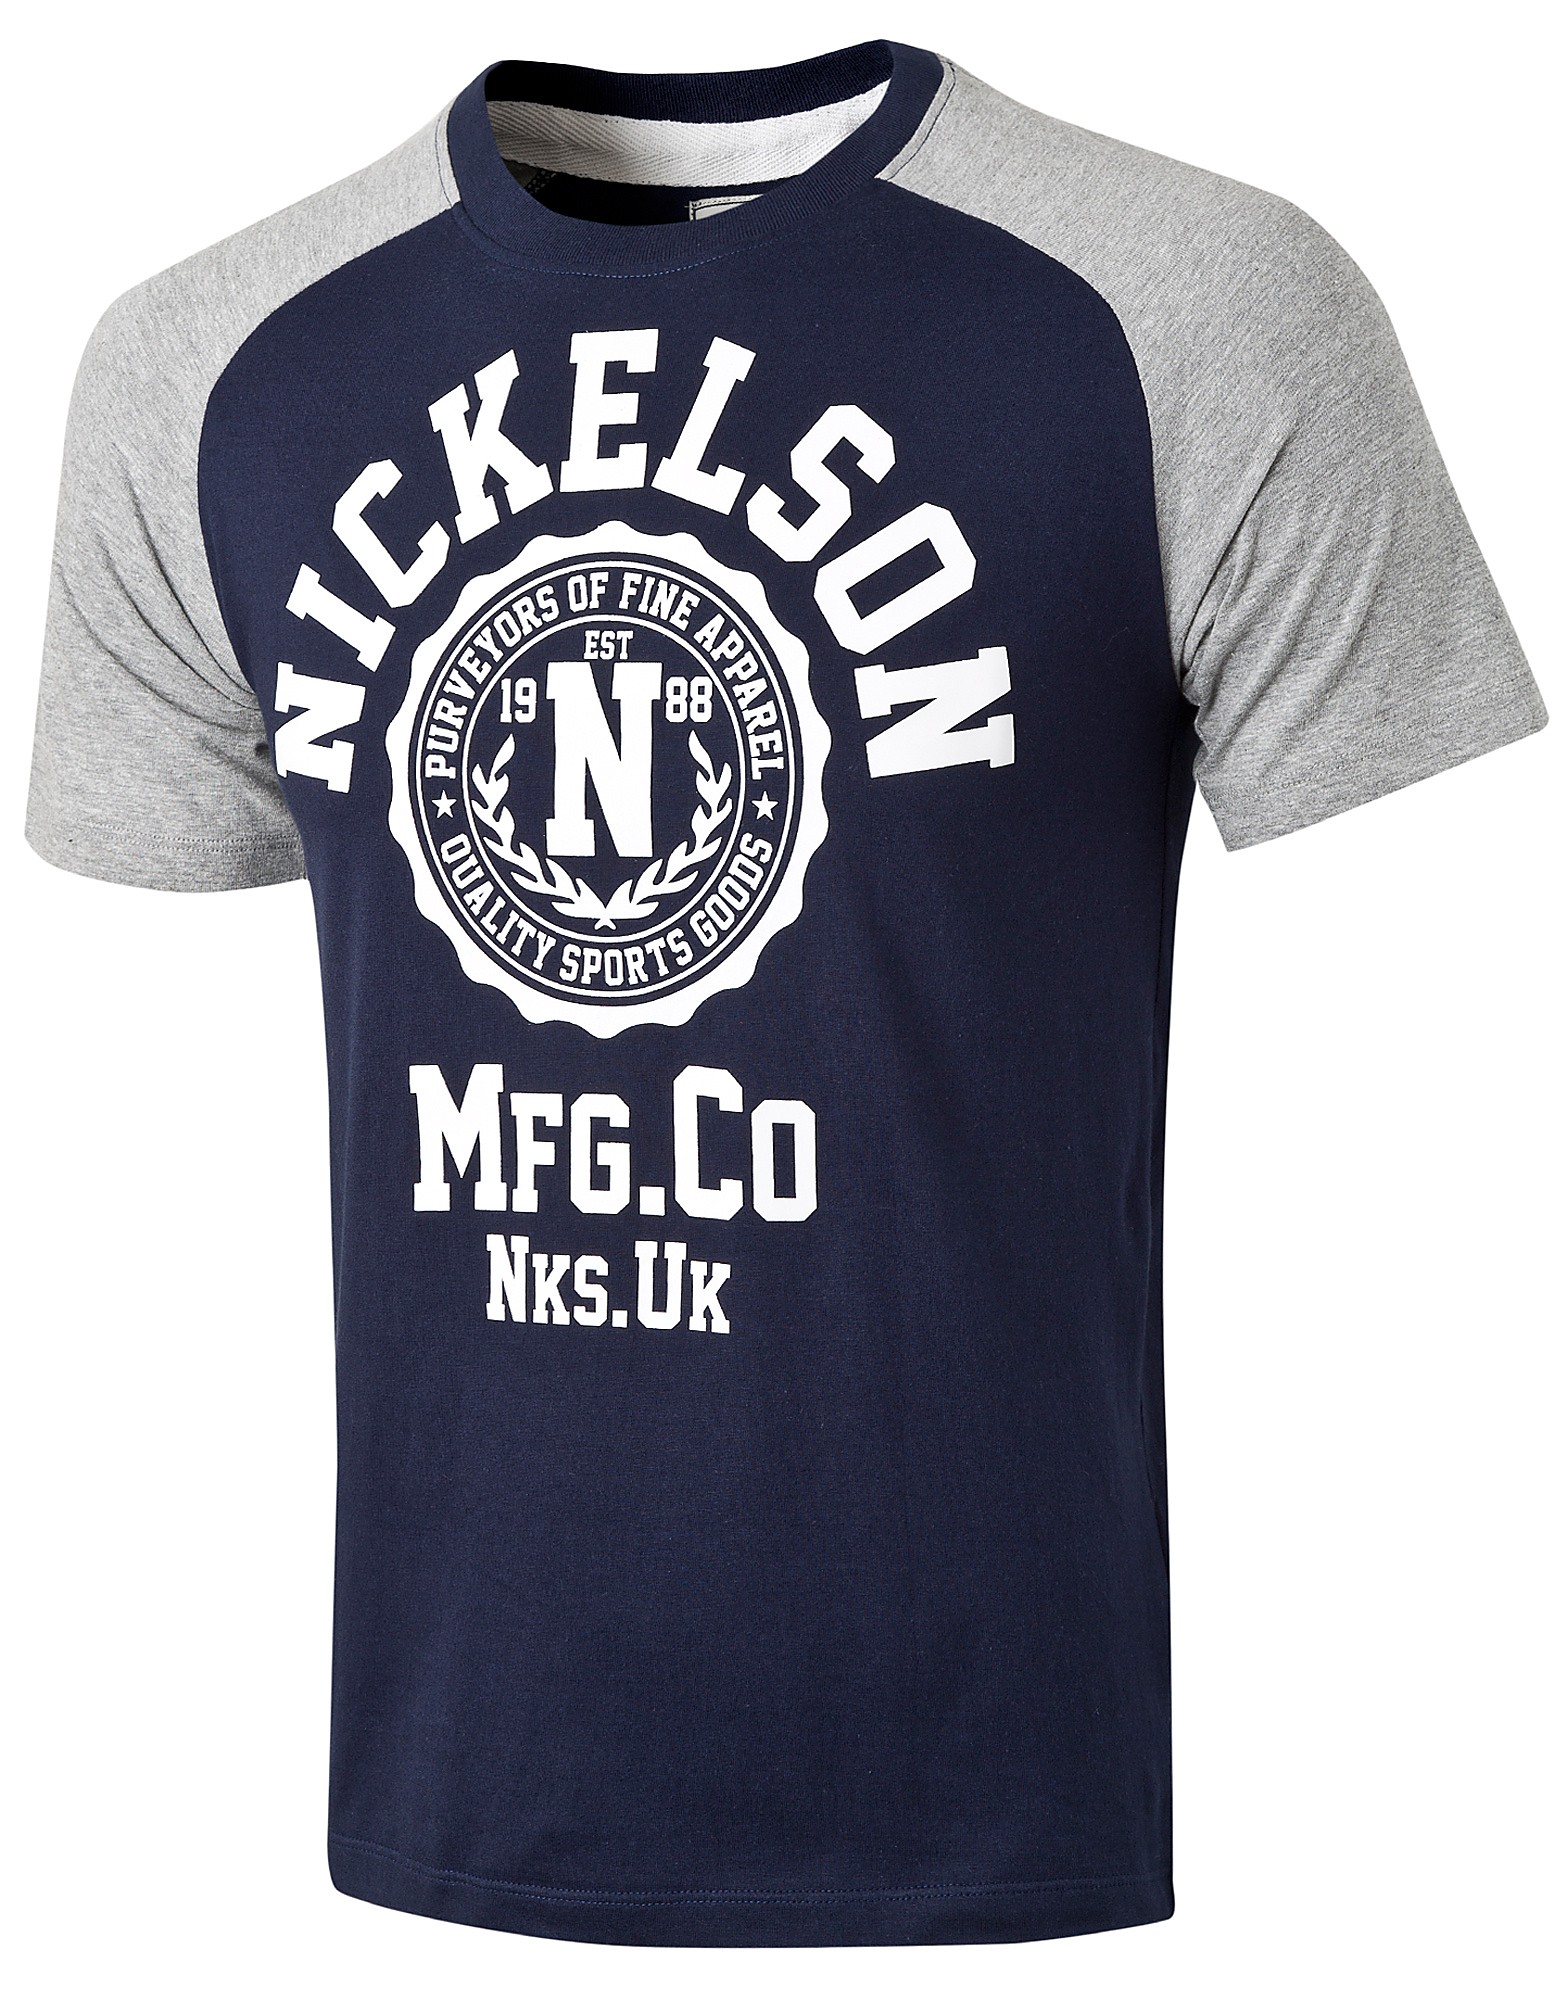 Nickelson Amherst T-Shirt